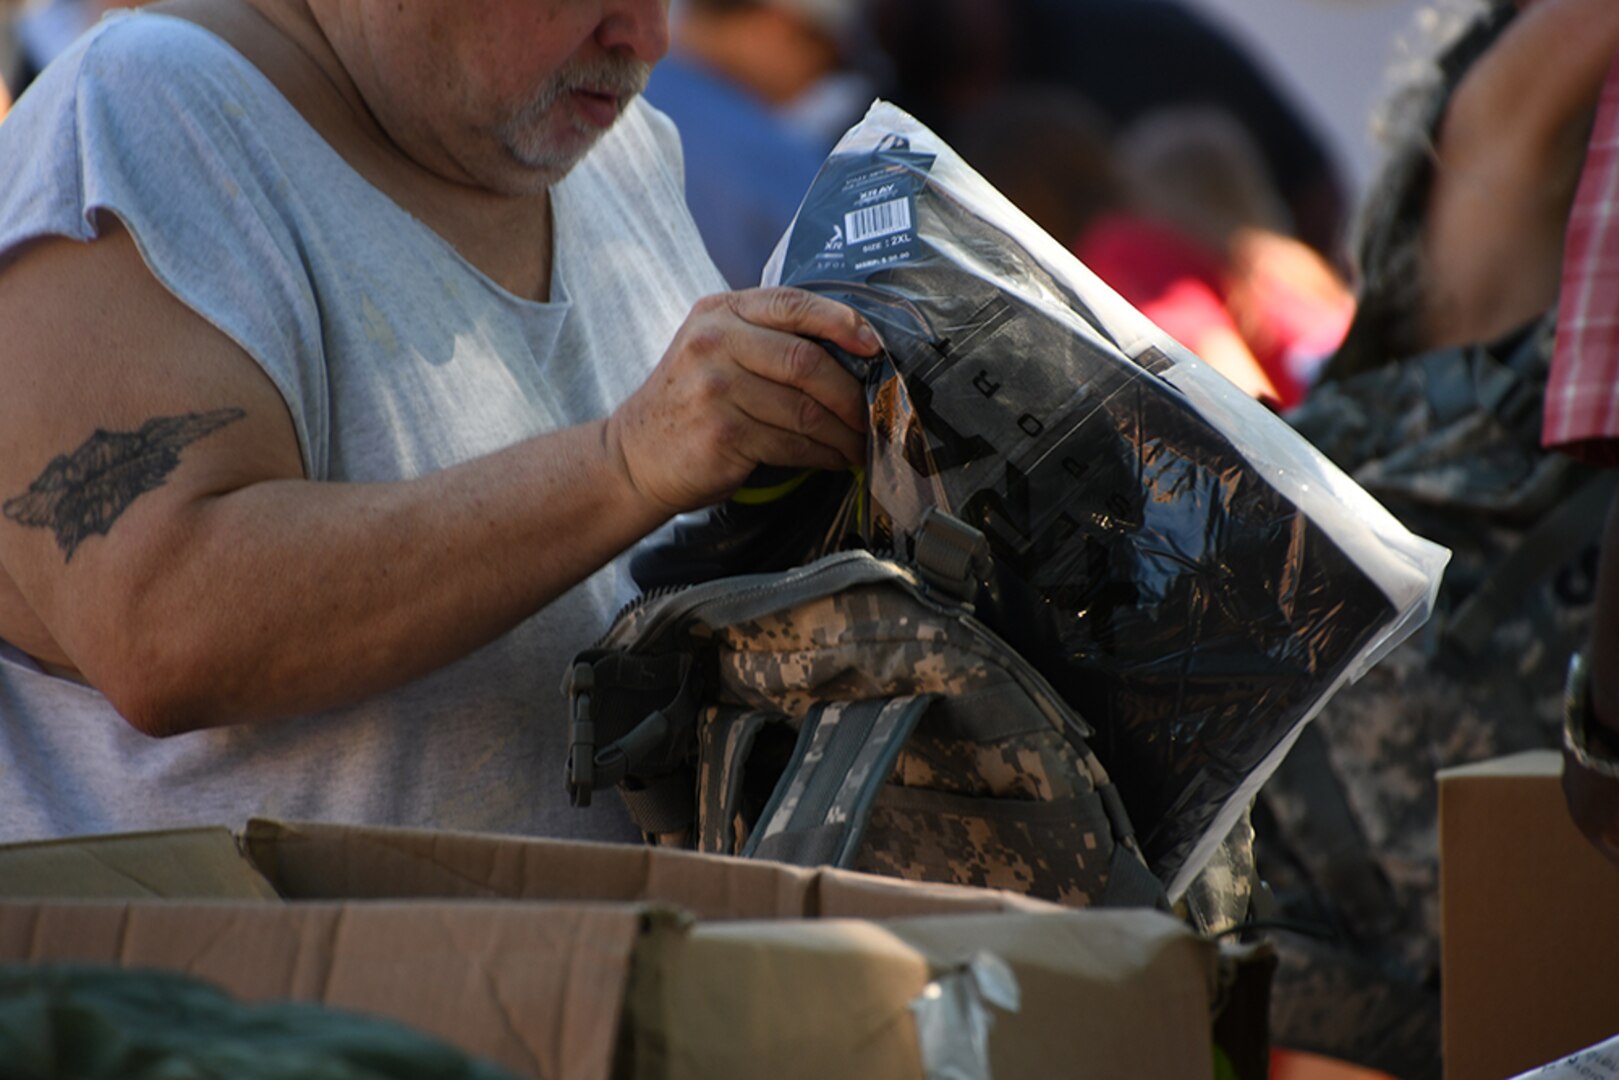 A man looks at surplus clothing.